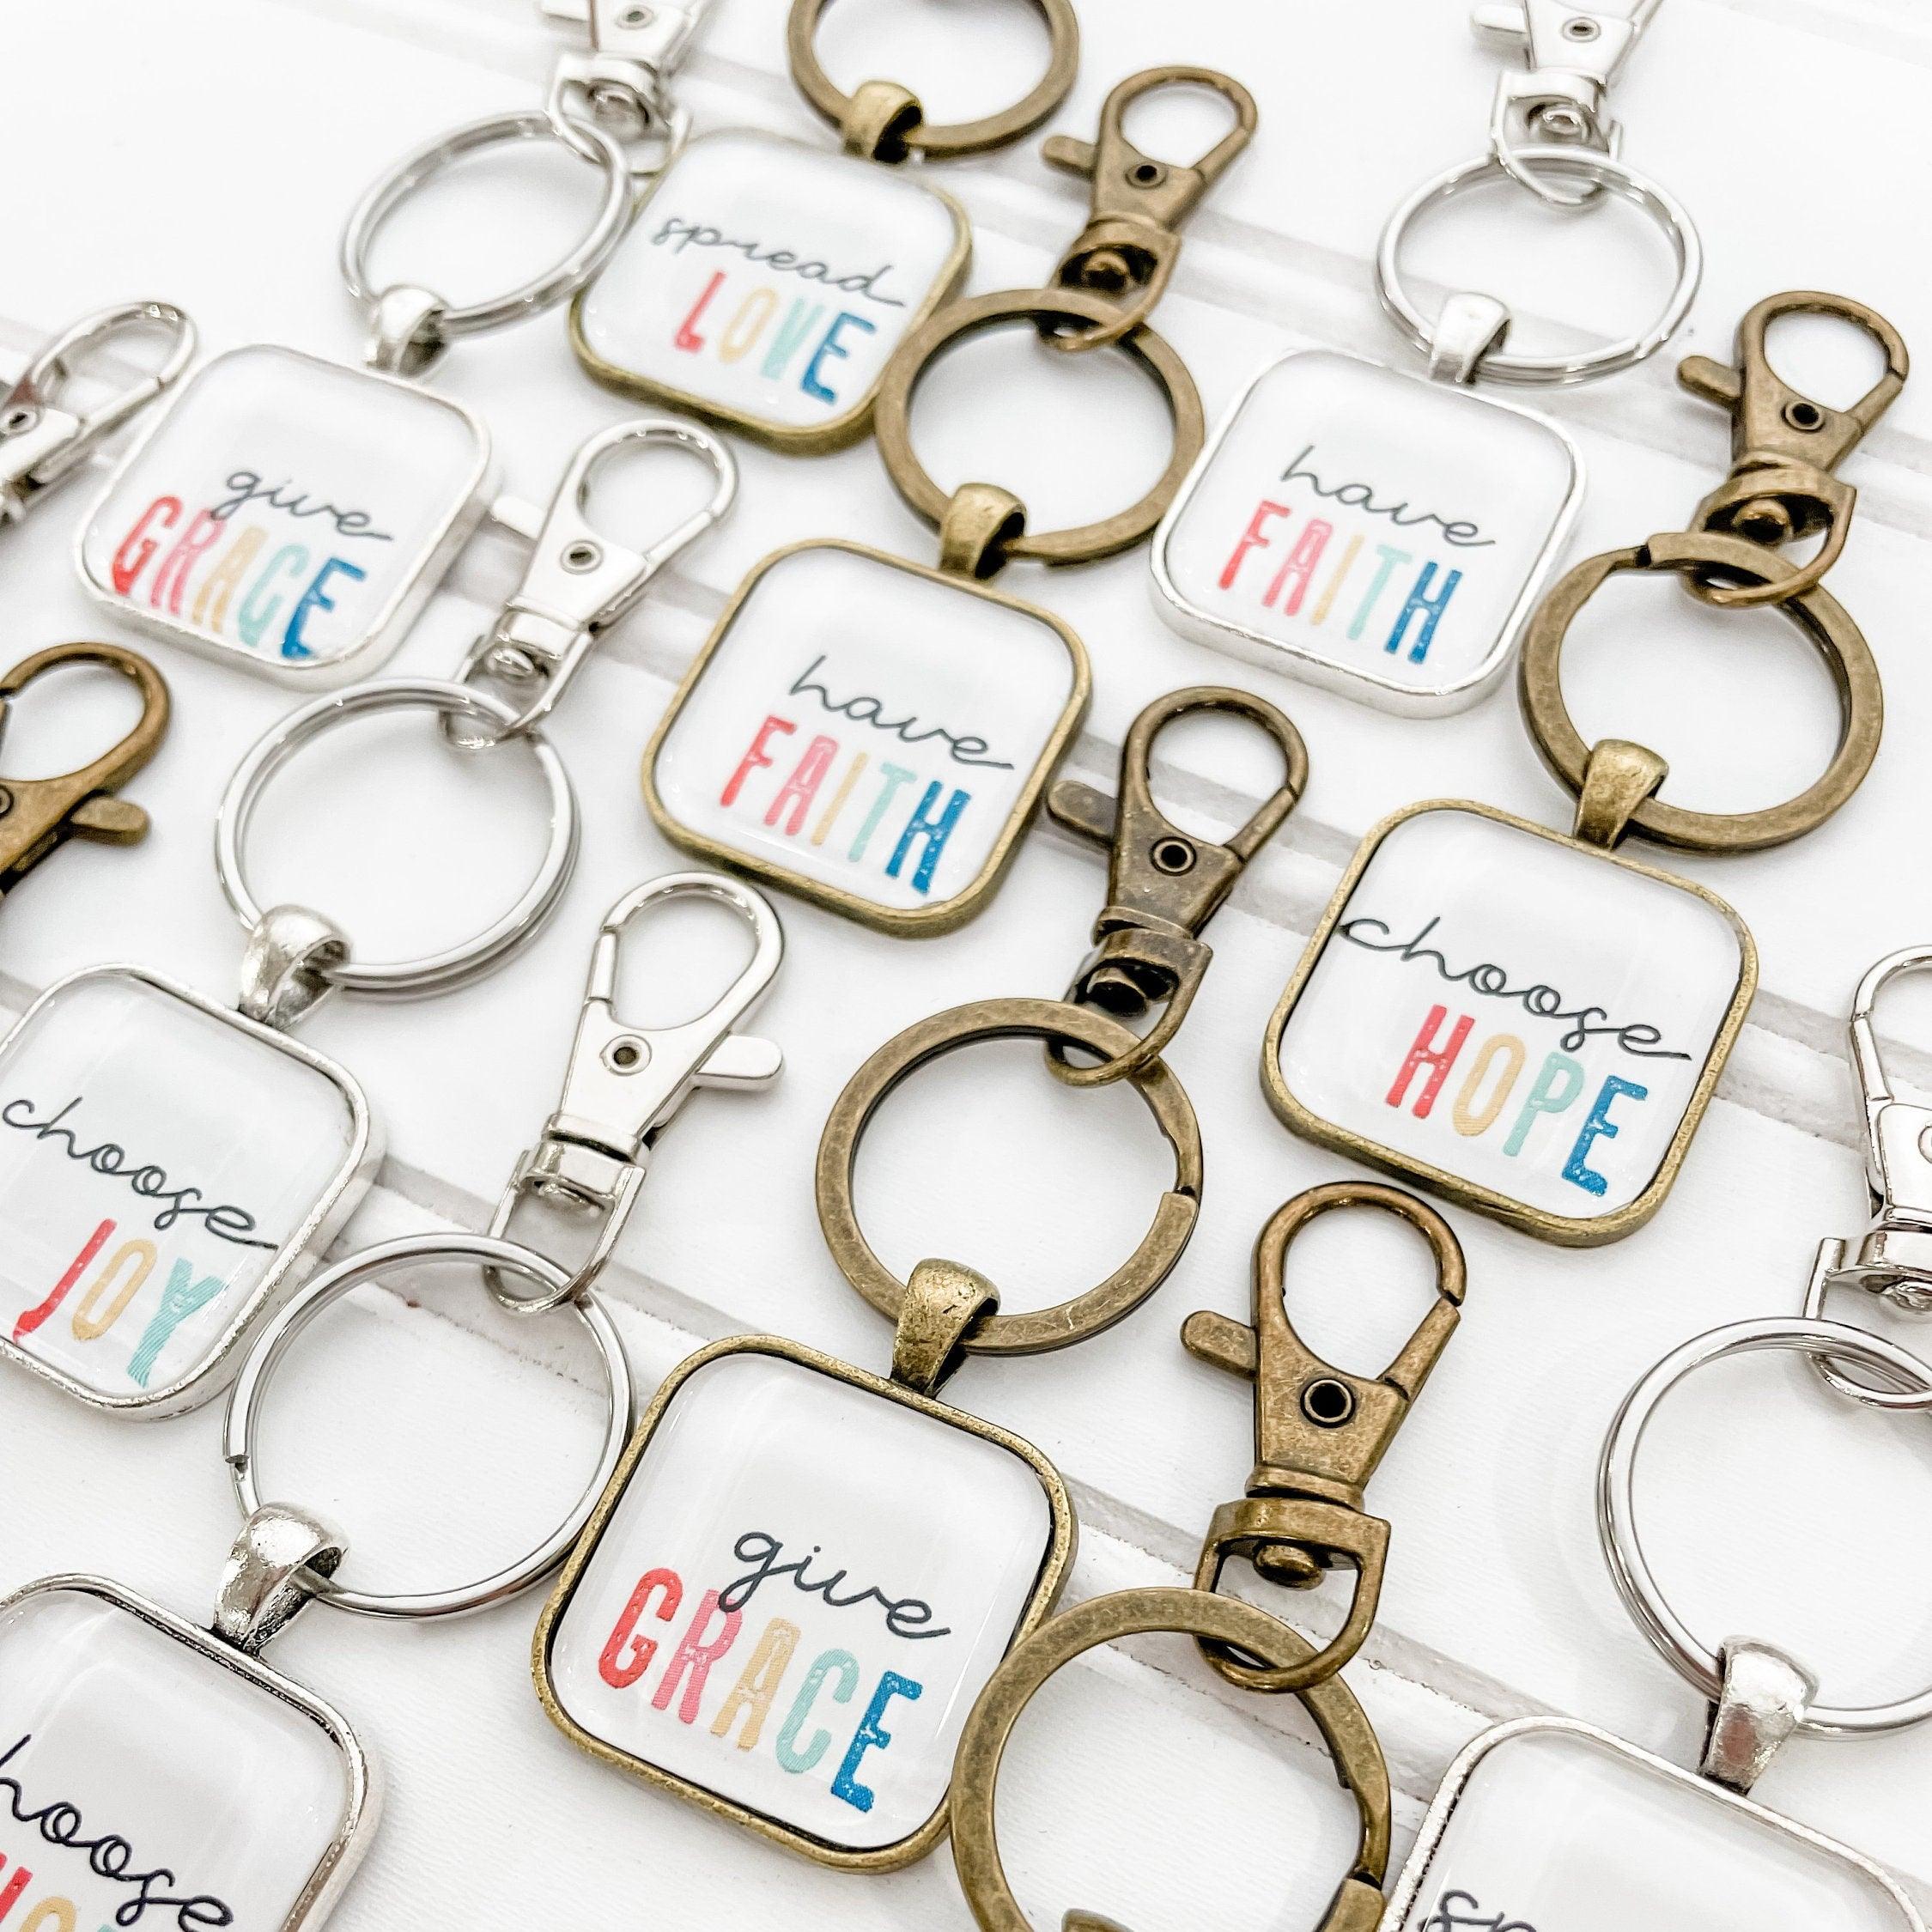 Bulk Gifts, 10+ Keychains with Group Discount & Free Shipping